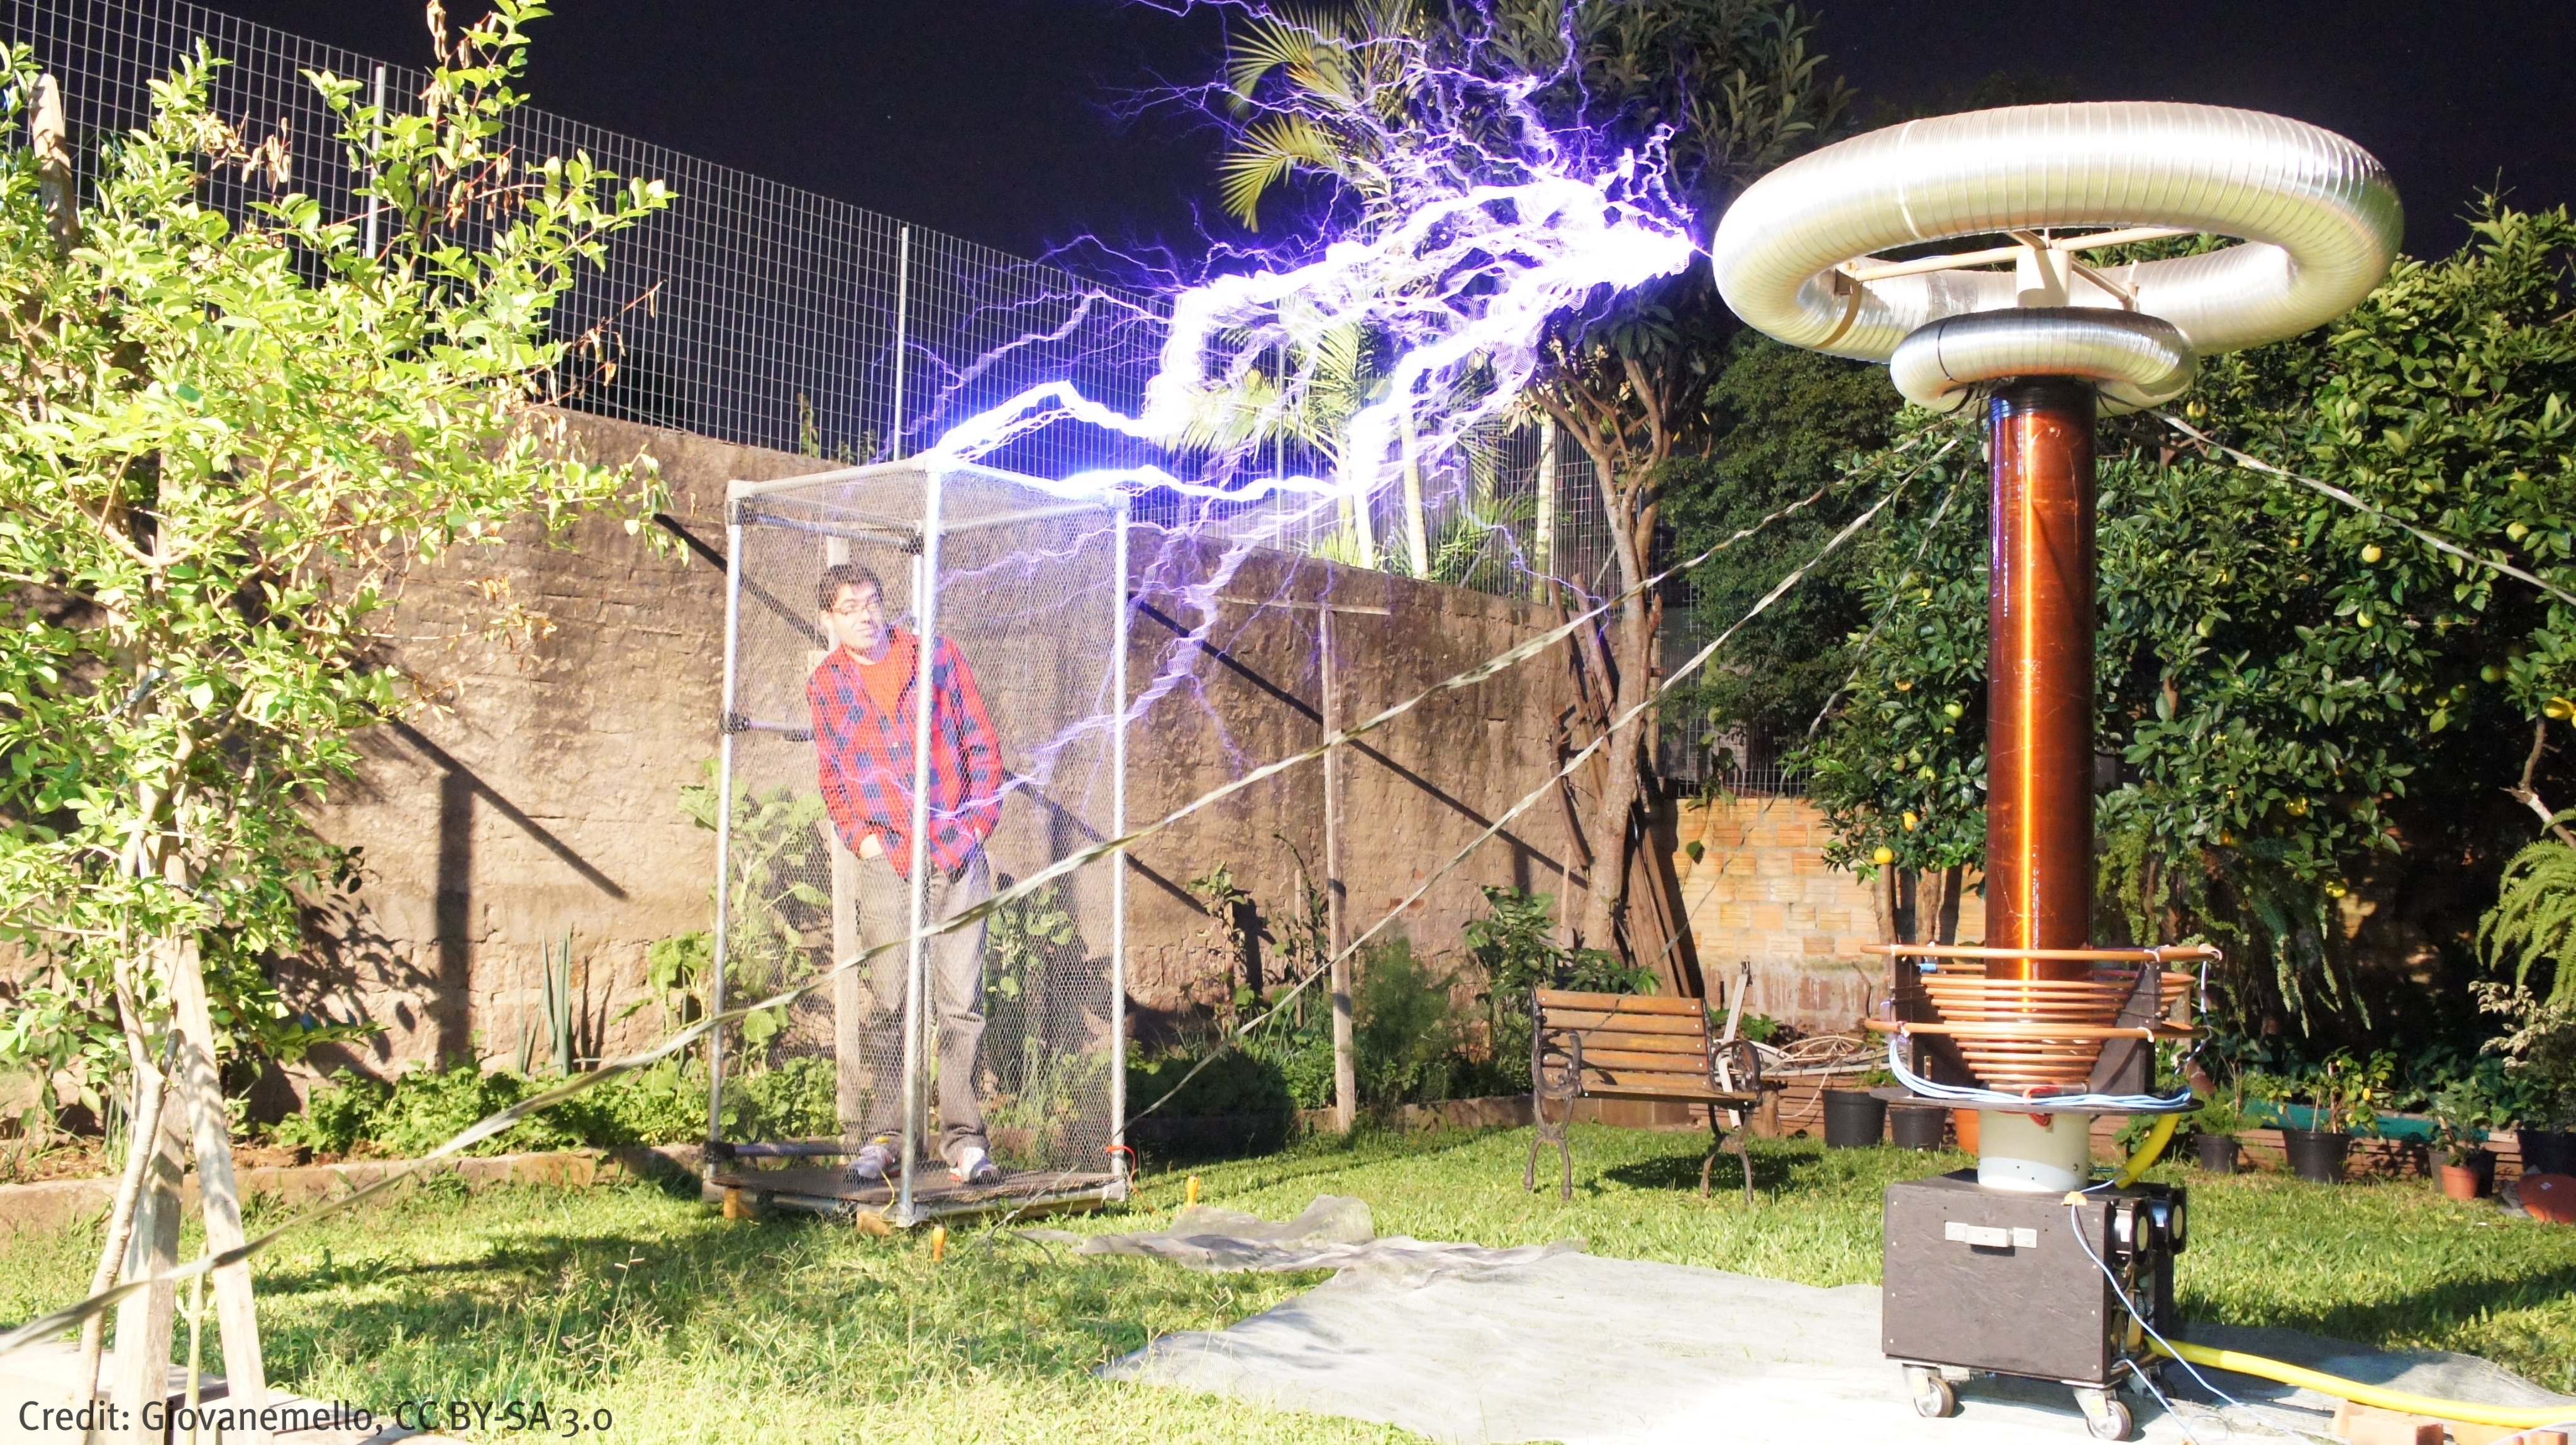 Royal Institution on X: The Faraday cage may be one of the great natural  philosopher's most famous inventions (might be because of the name). But  how does it work? #Thread  /